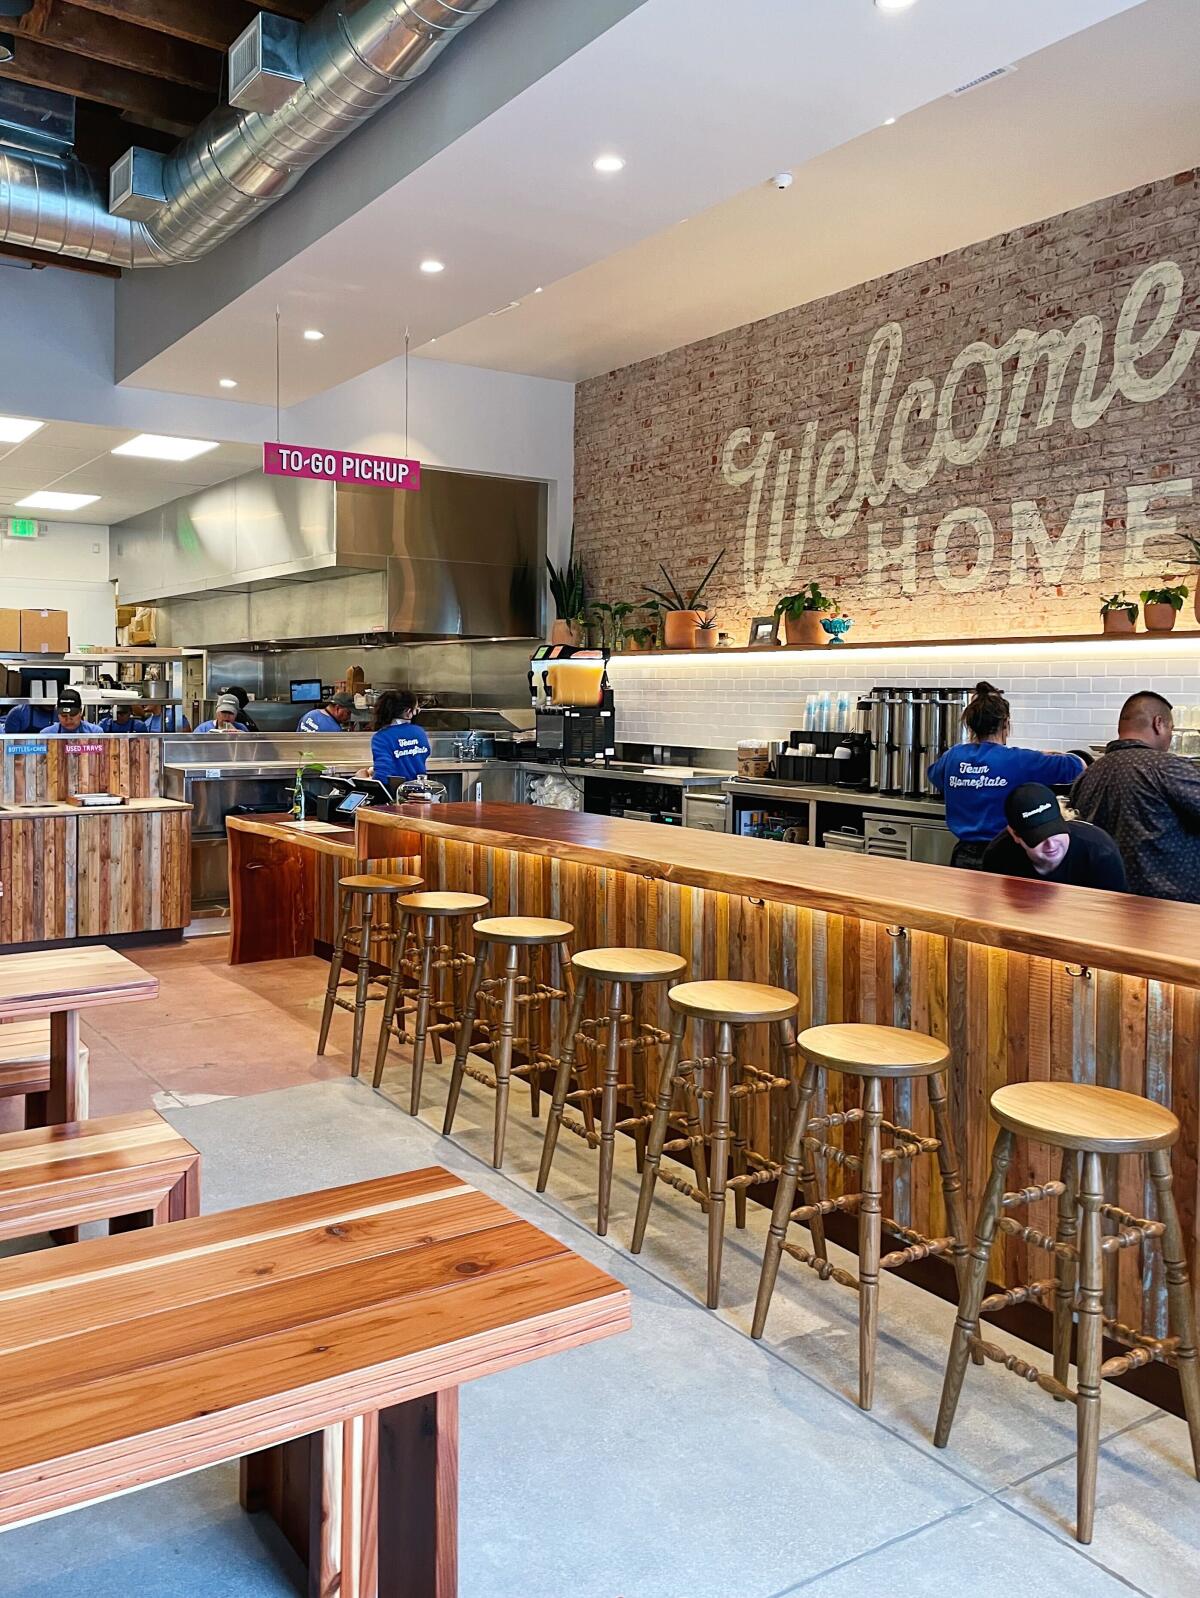 A vertical interior photo of the Atwater Village HomeState. Behind the bar a sign reads "Welcome Home."